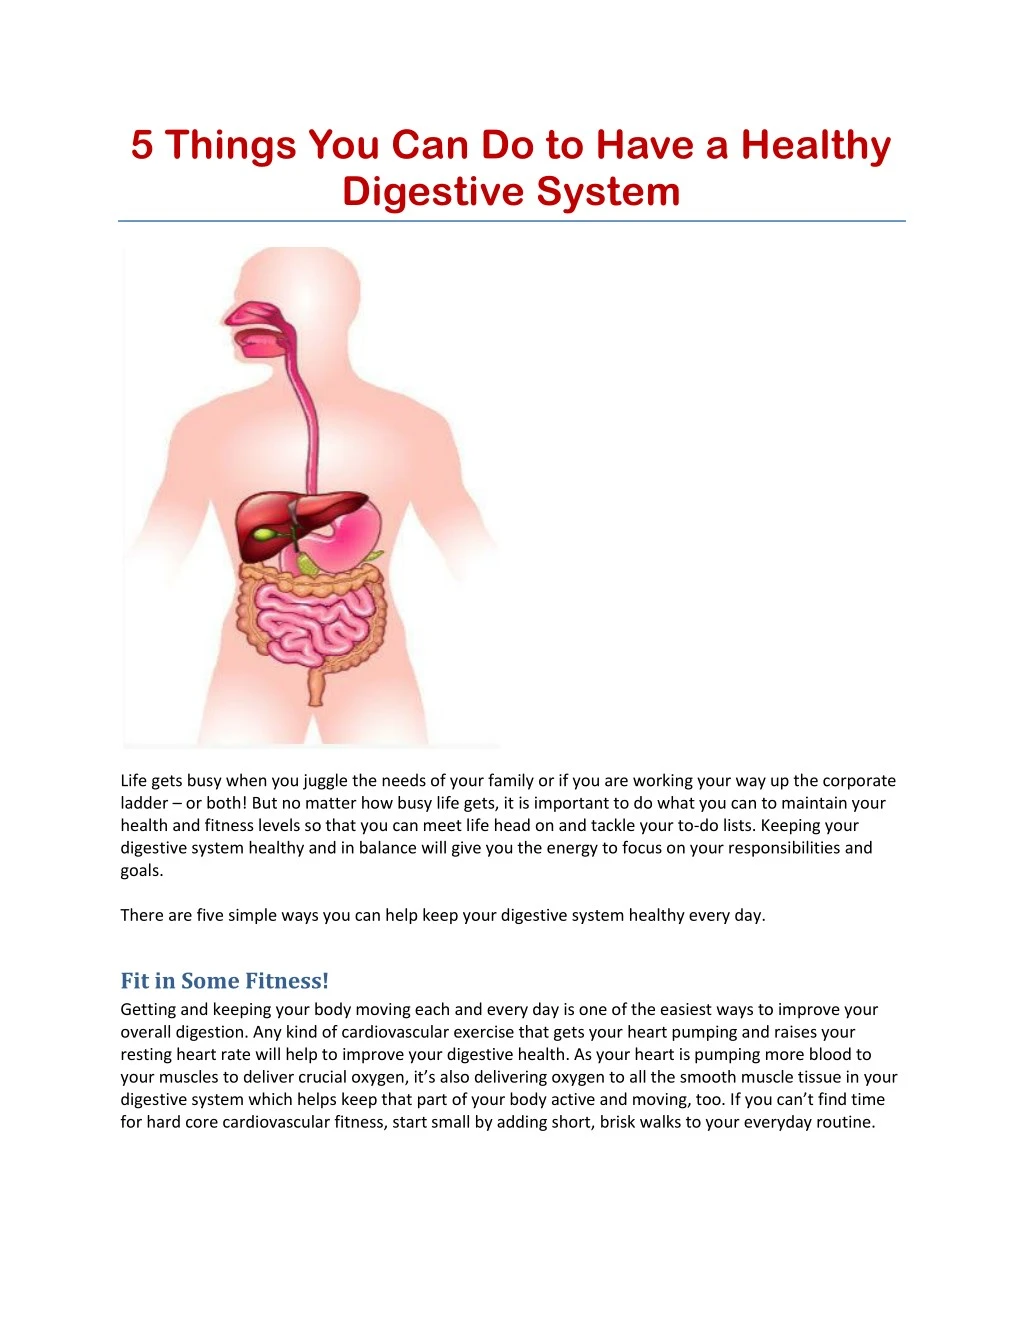 5 things you can do to have a healthy digestive